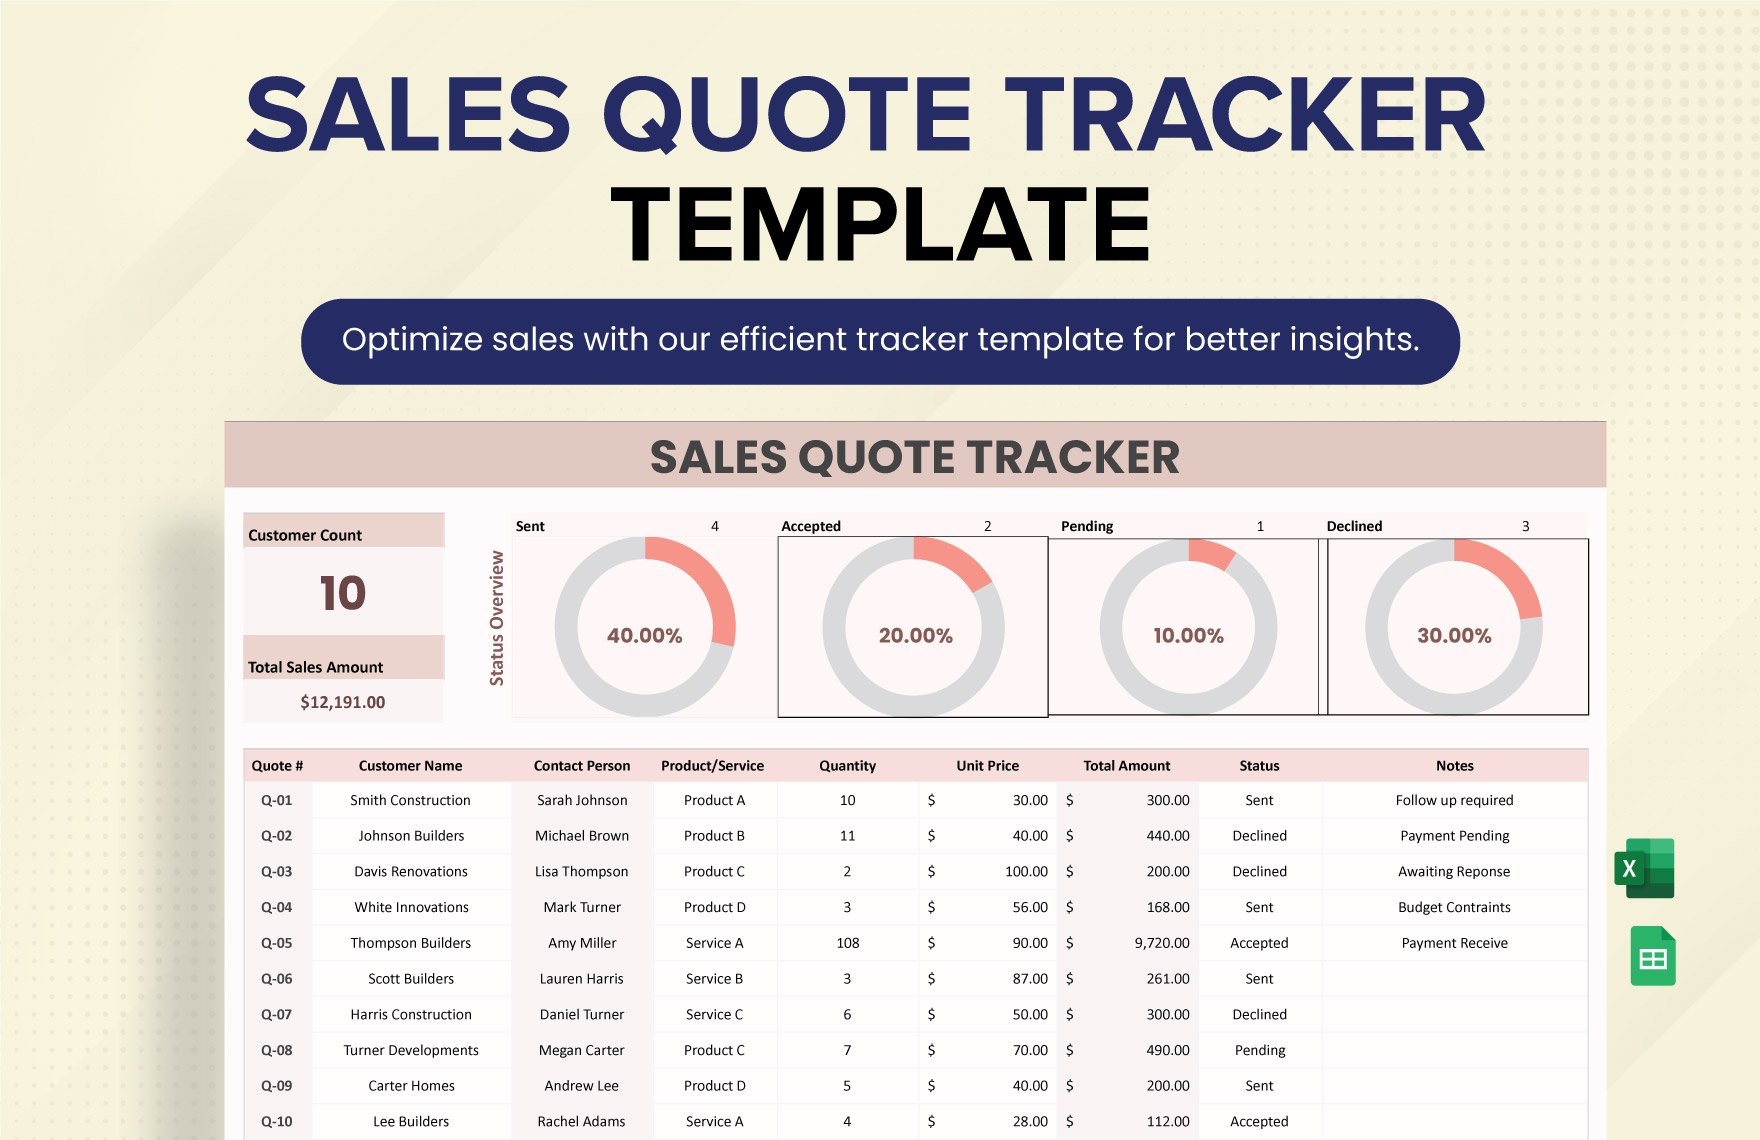 Sales Quote Tracker Template